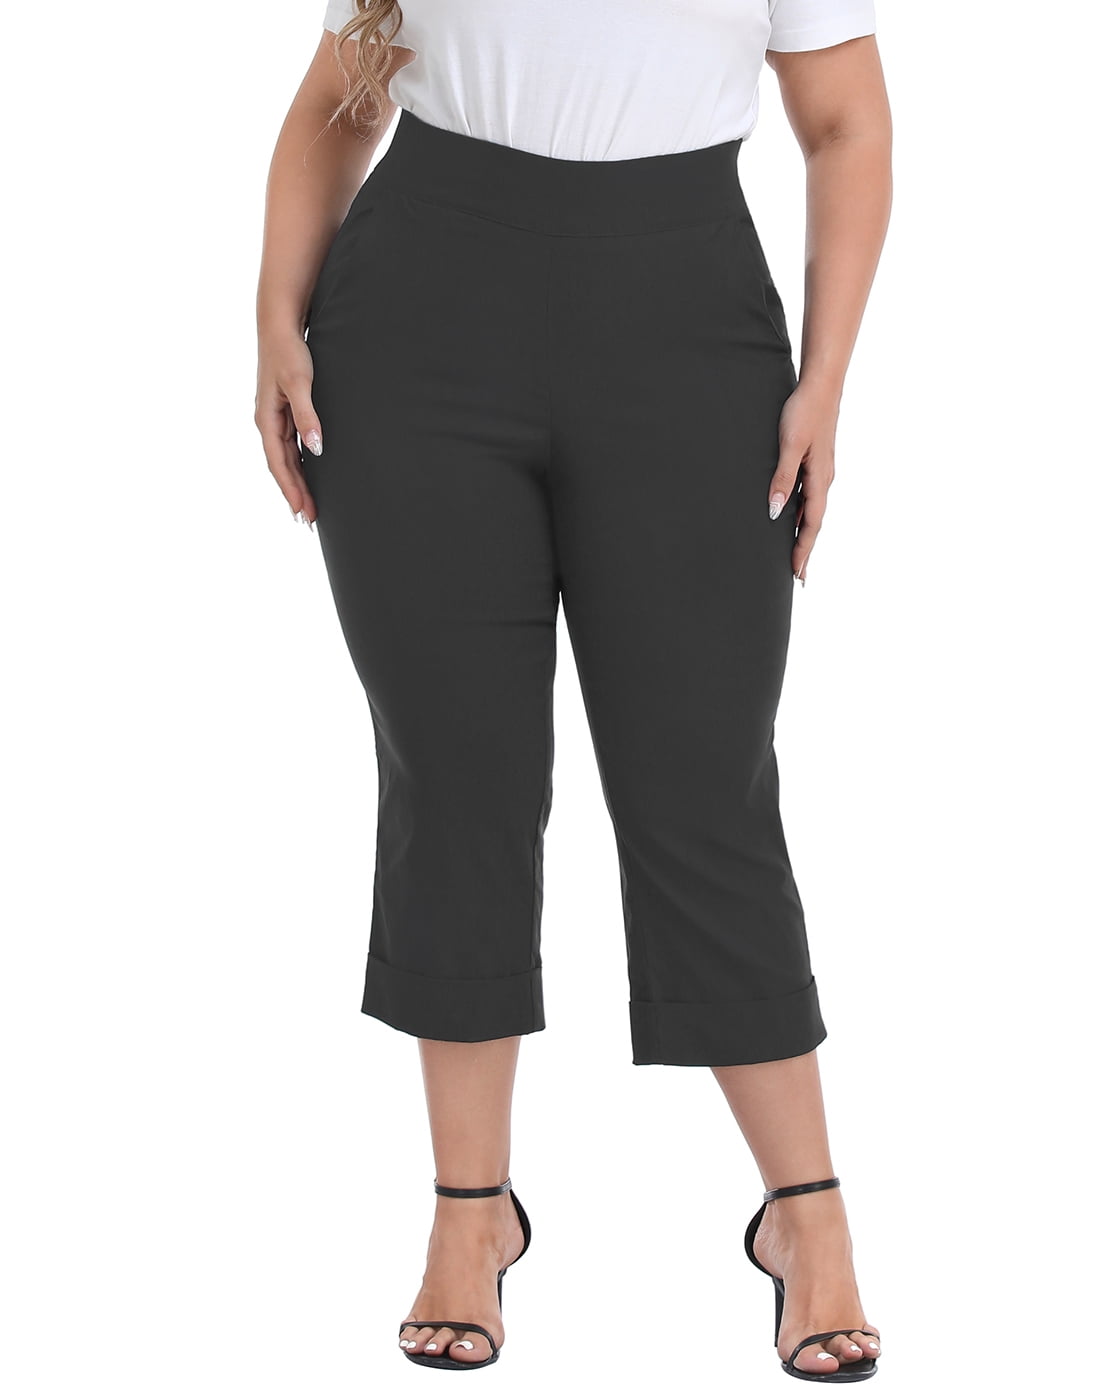 HDE Women's Plus Size Pull On Capris with Pockets Cropped Pants ...